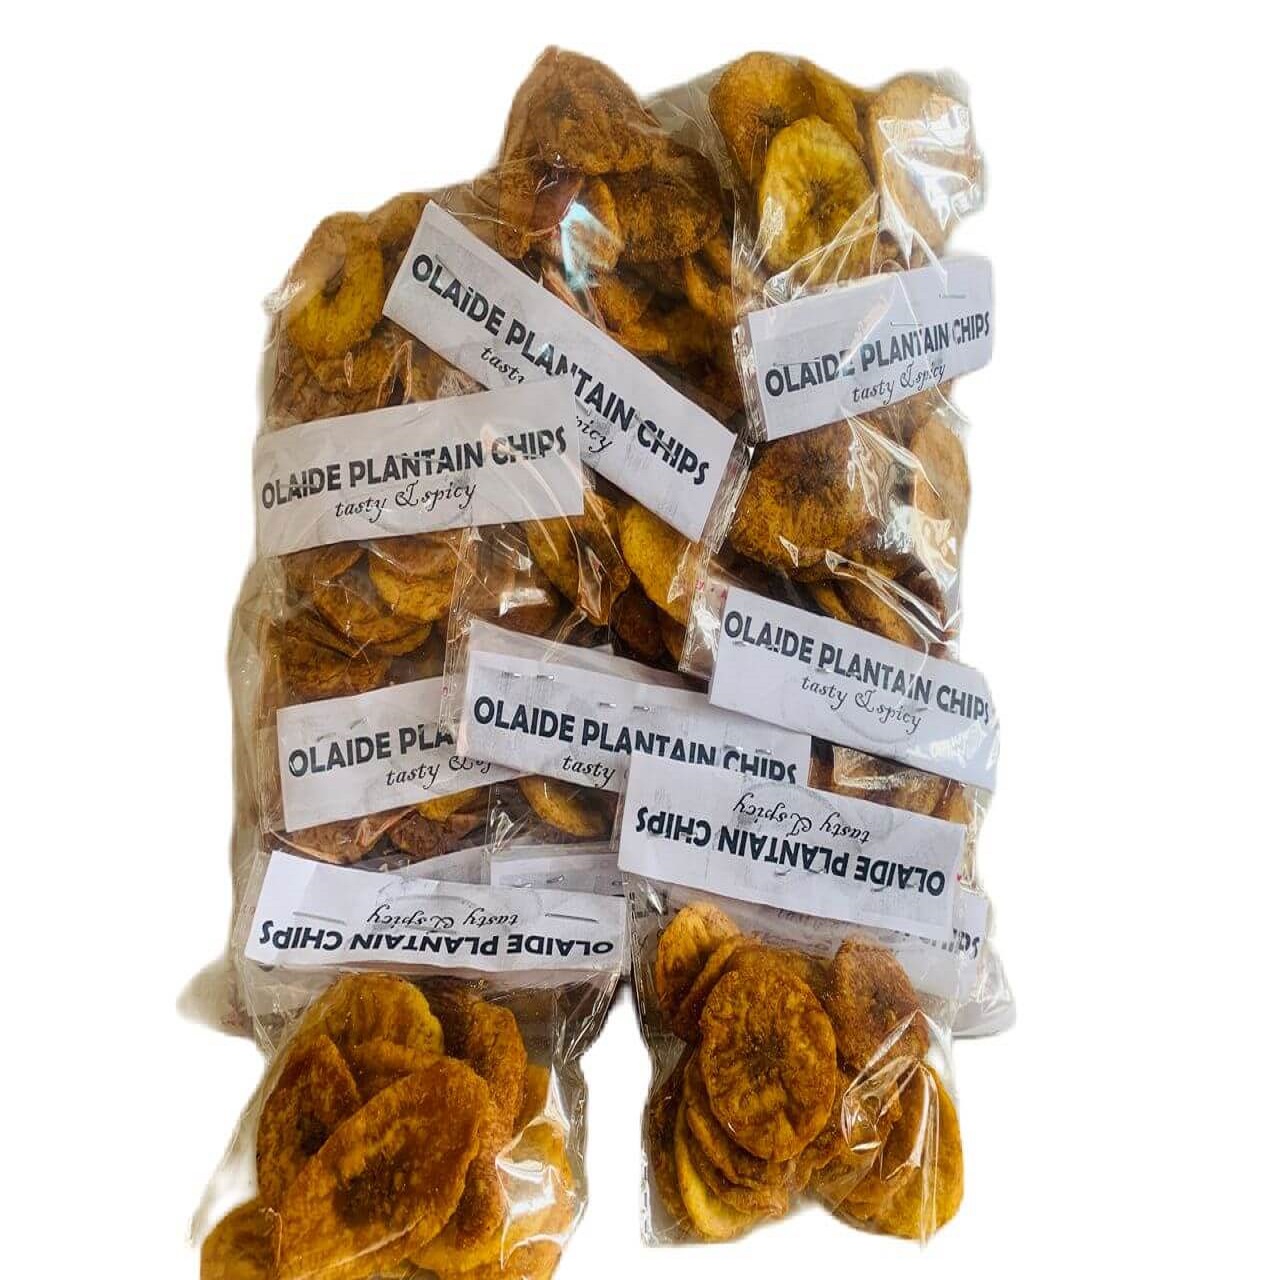 a pack of Olaide plaintain chips